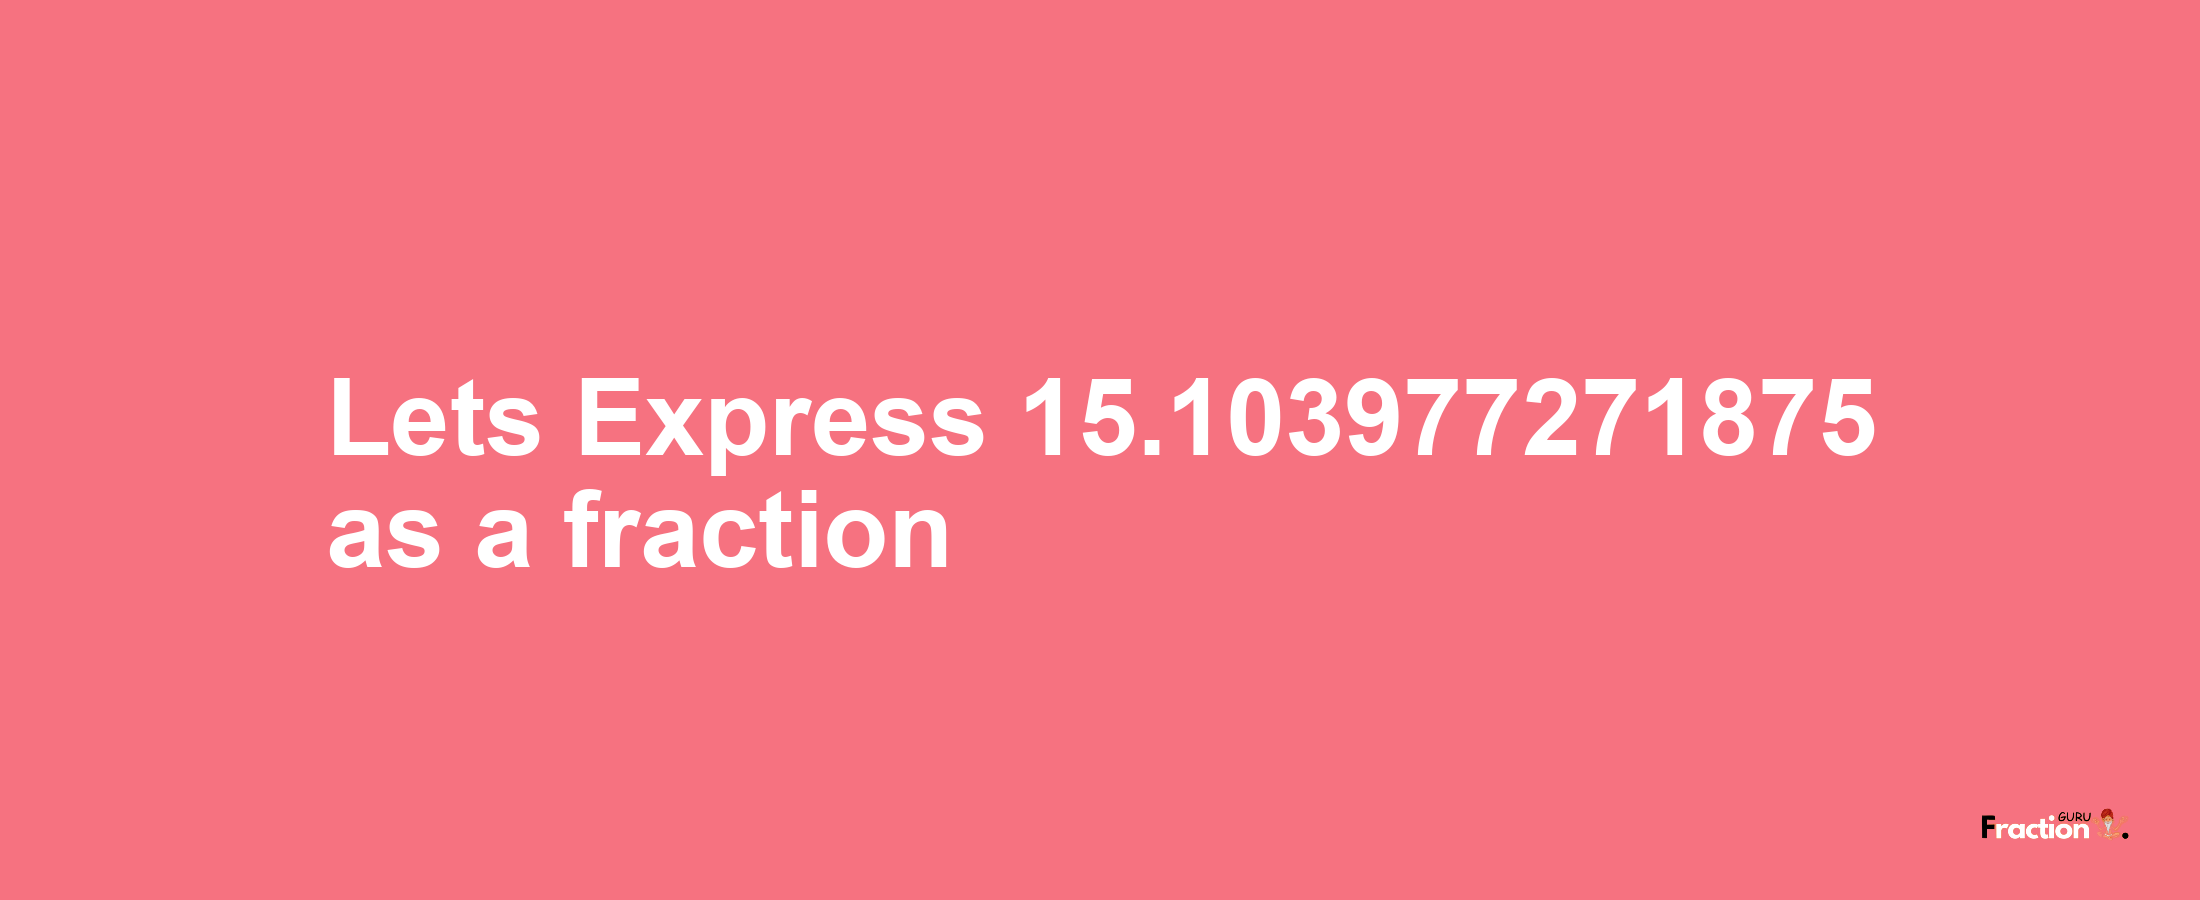 Lets Express 15.103977271875 as afraction